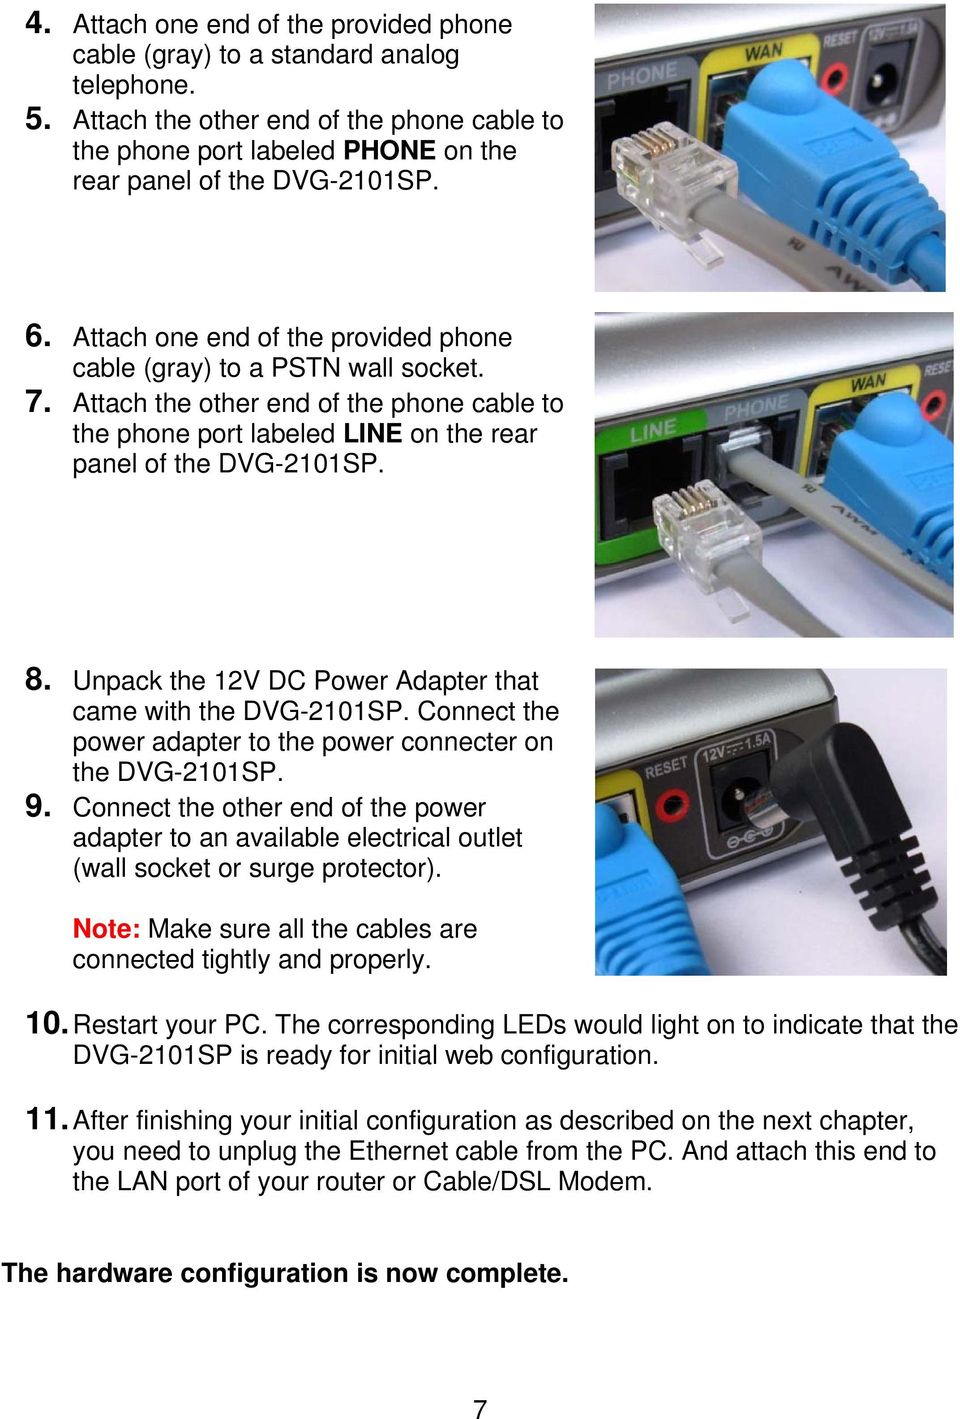 Unpack the 12V DC Power Adapter that came with the DVG-2101SP. Connect the power adapter to the power connecter on the DVG-2101SP. 9.